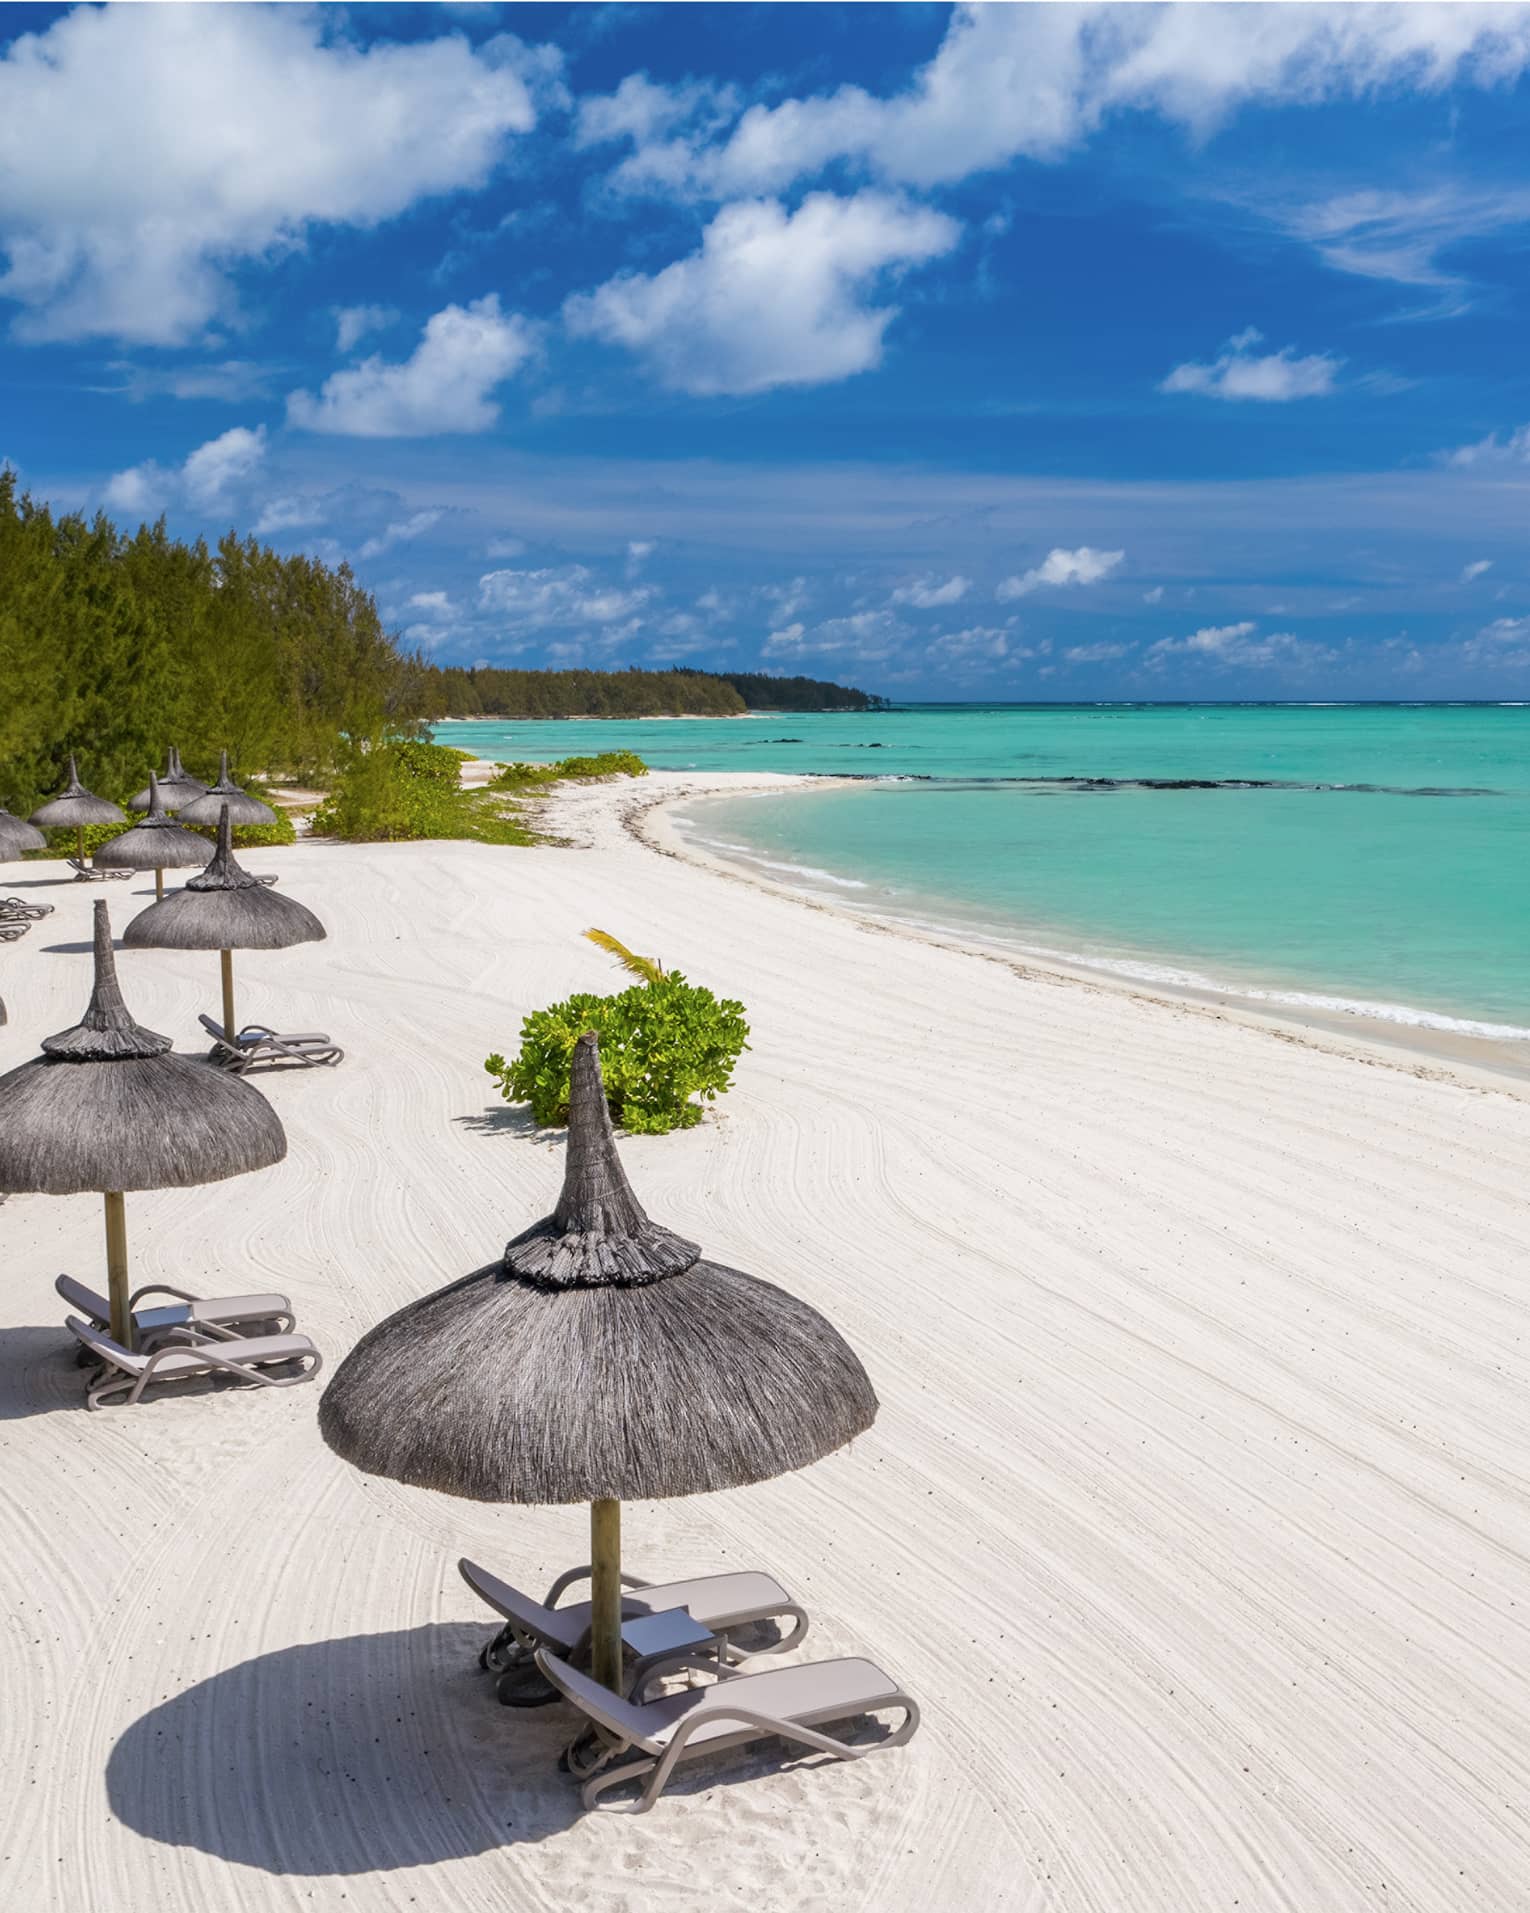 White sand beach with thatched umbrellas and lounge chairs and aqua ocean with blue sky above